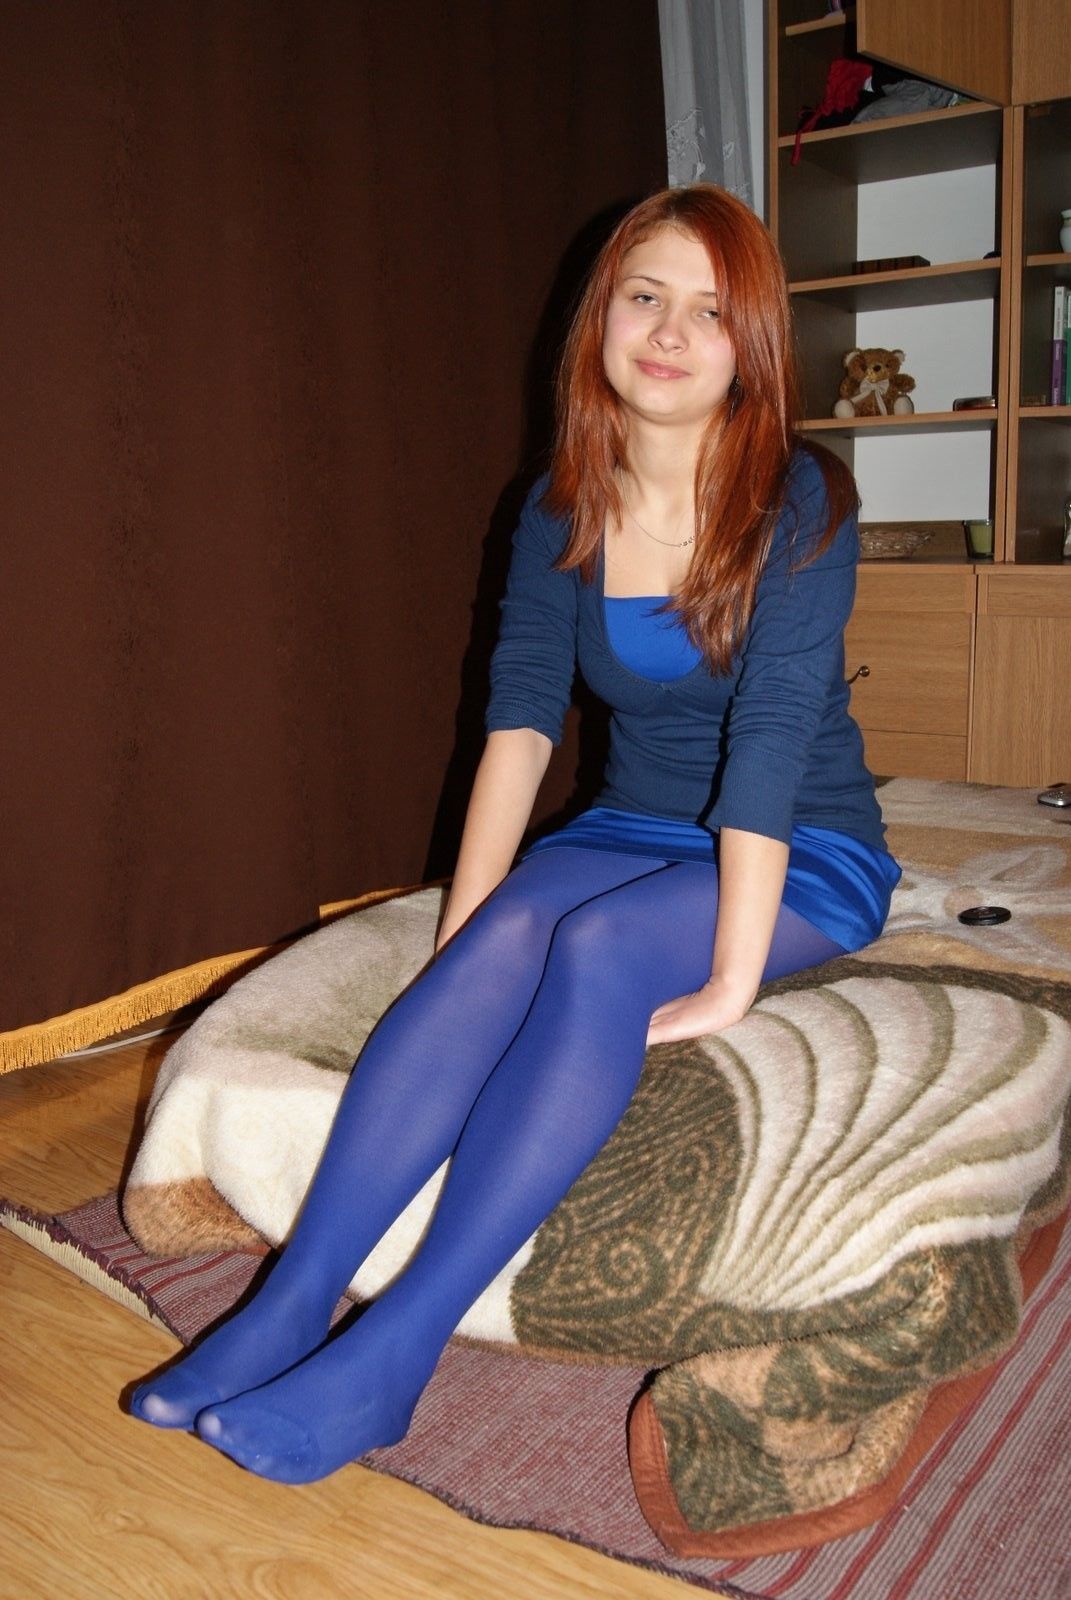 Women`s Legs and Feet in Tights: Legs and Feet in Blue Tights 42